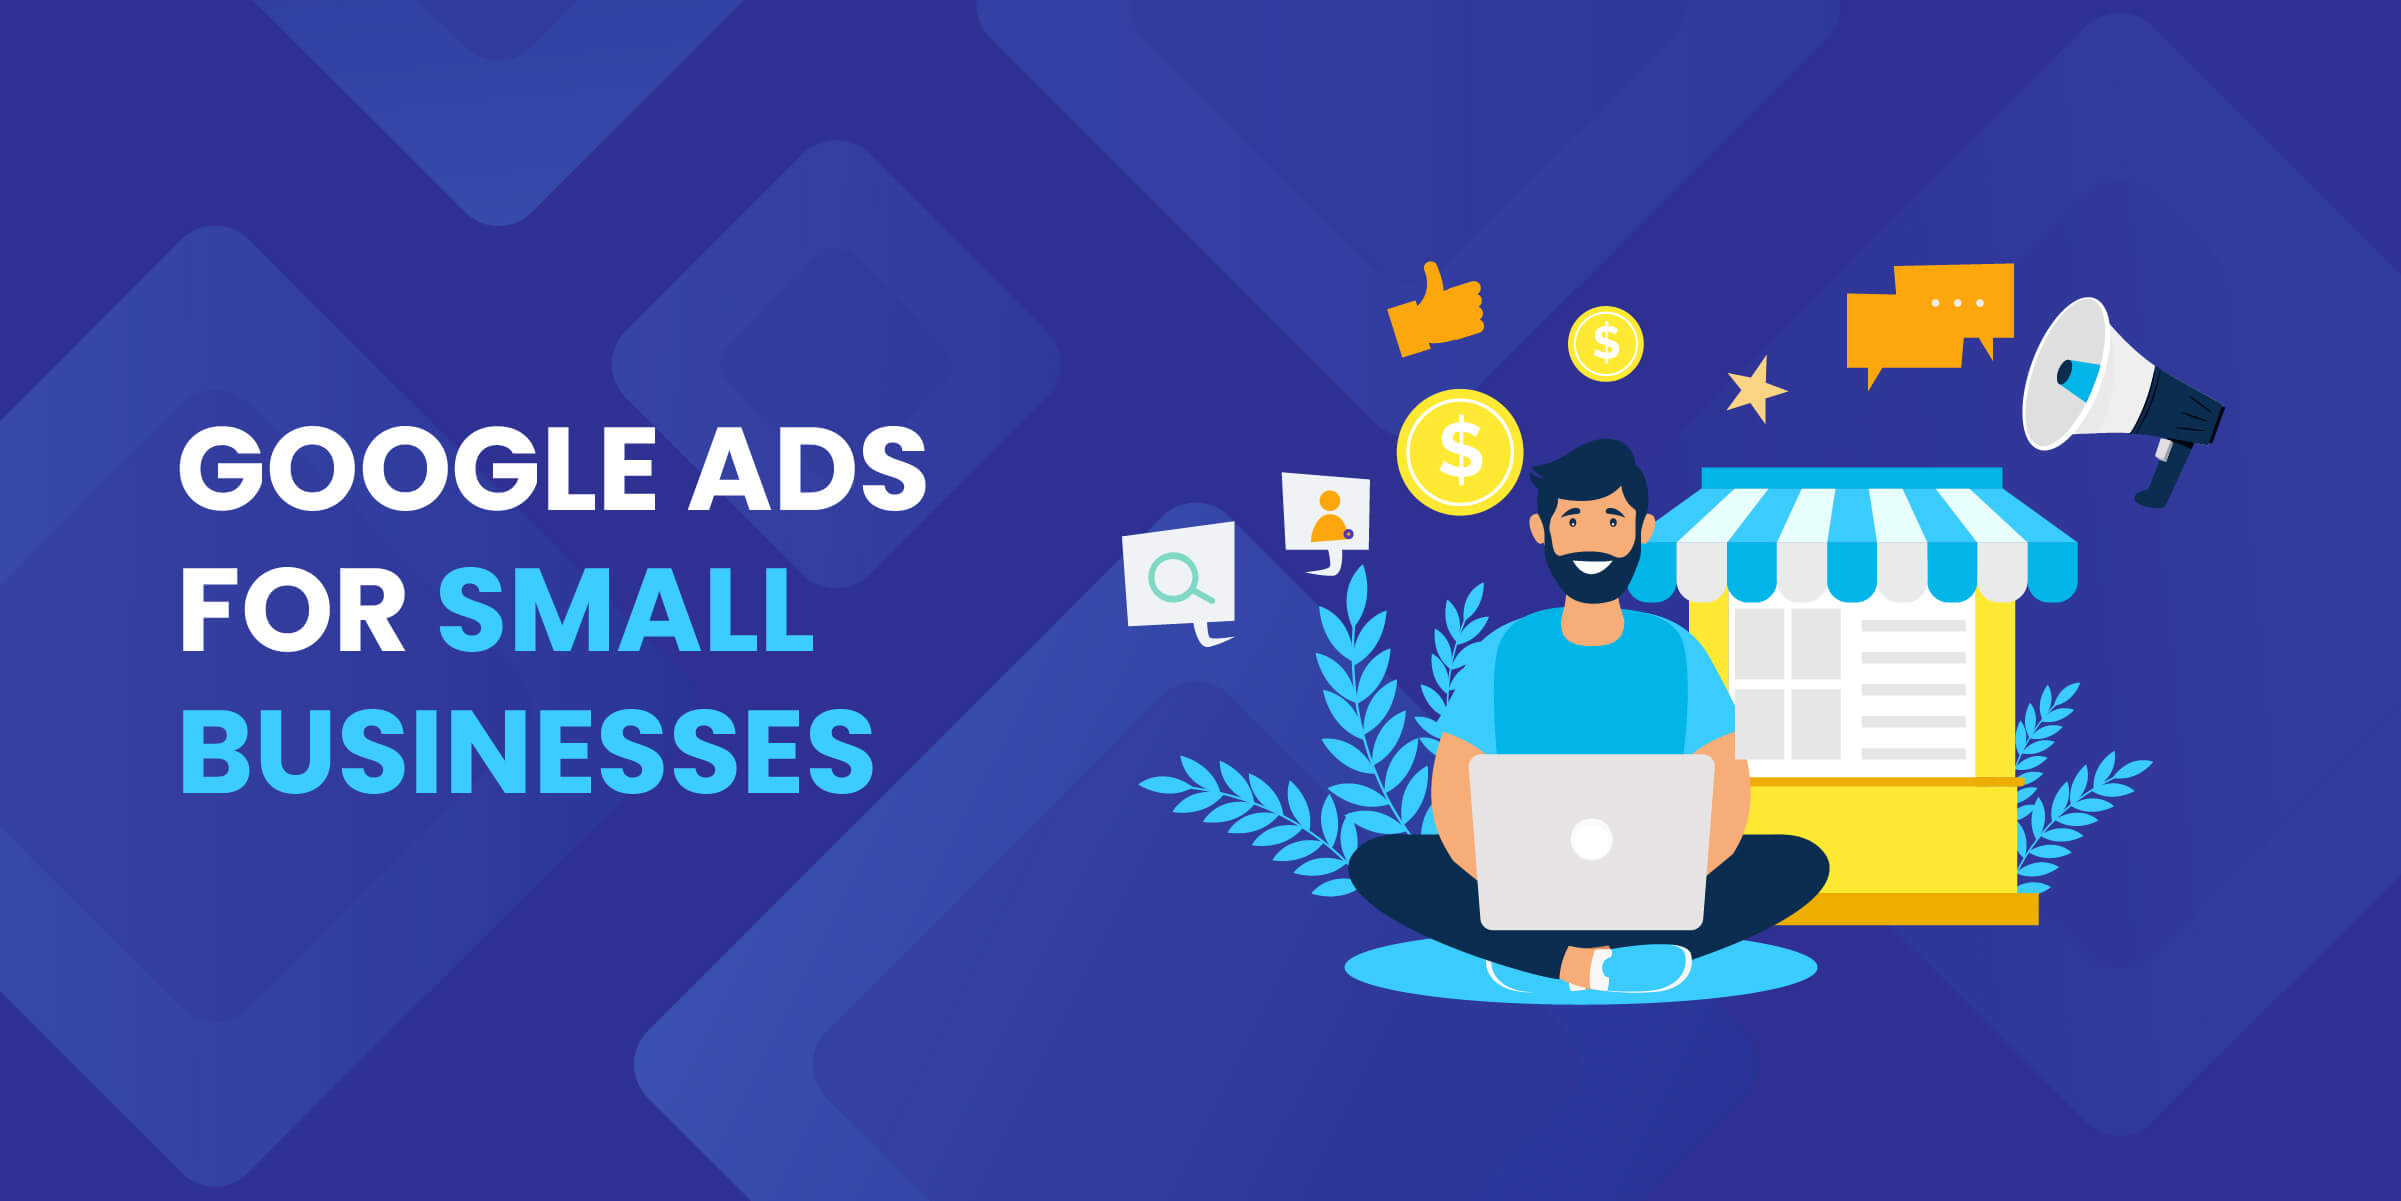 Google Ads for Small Business